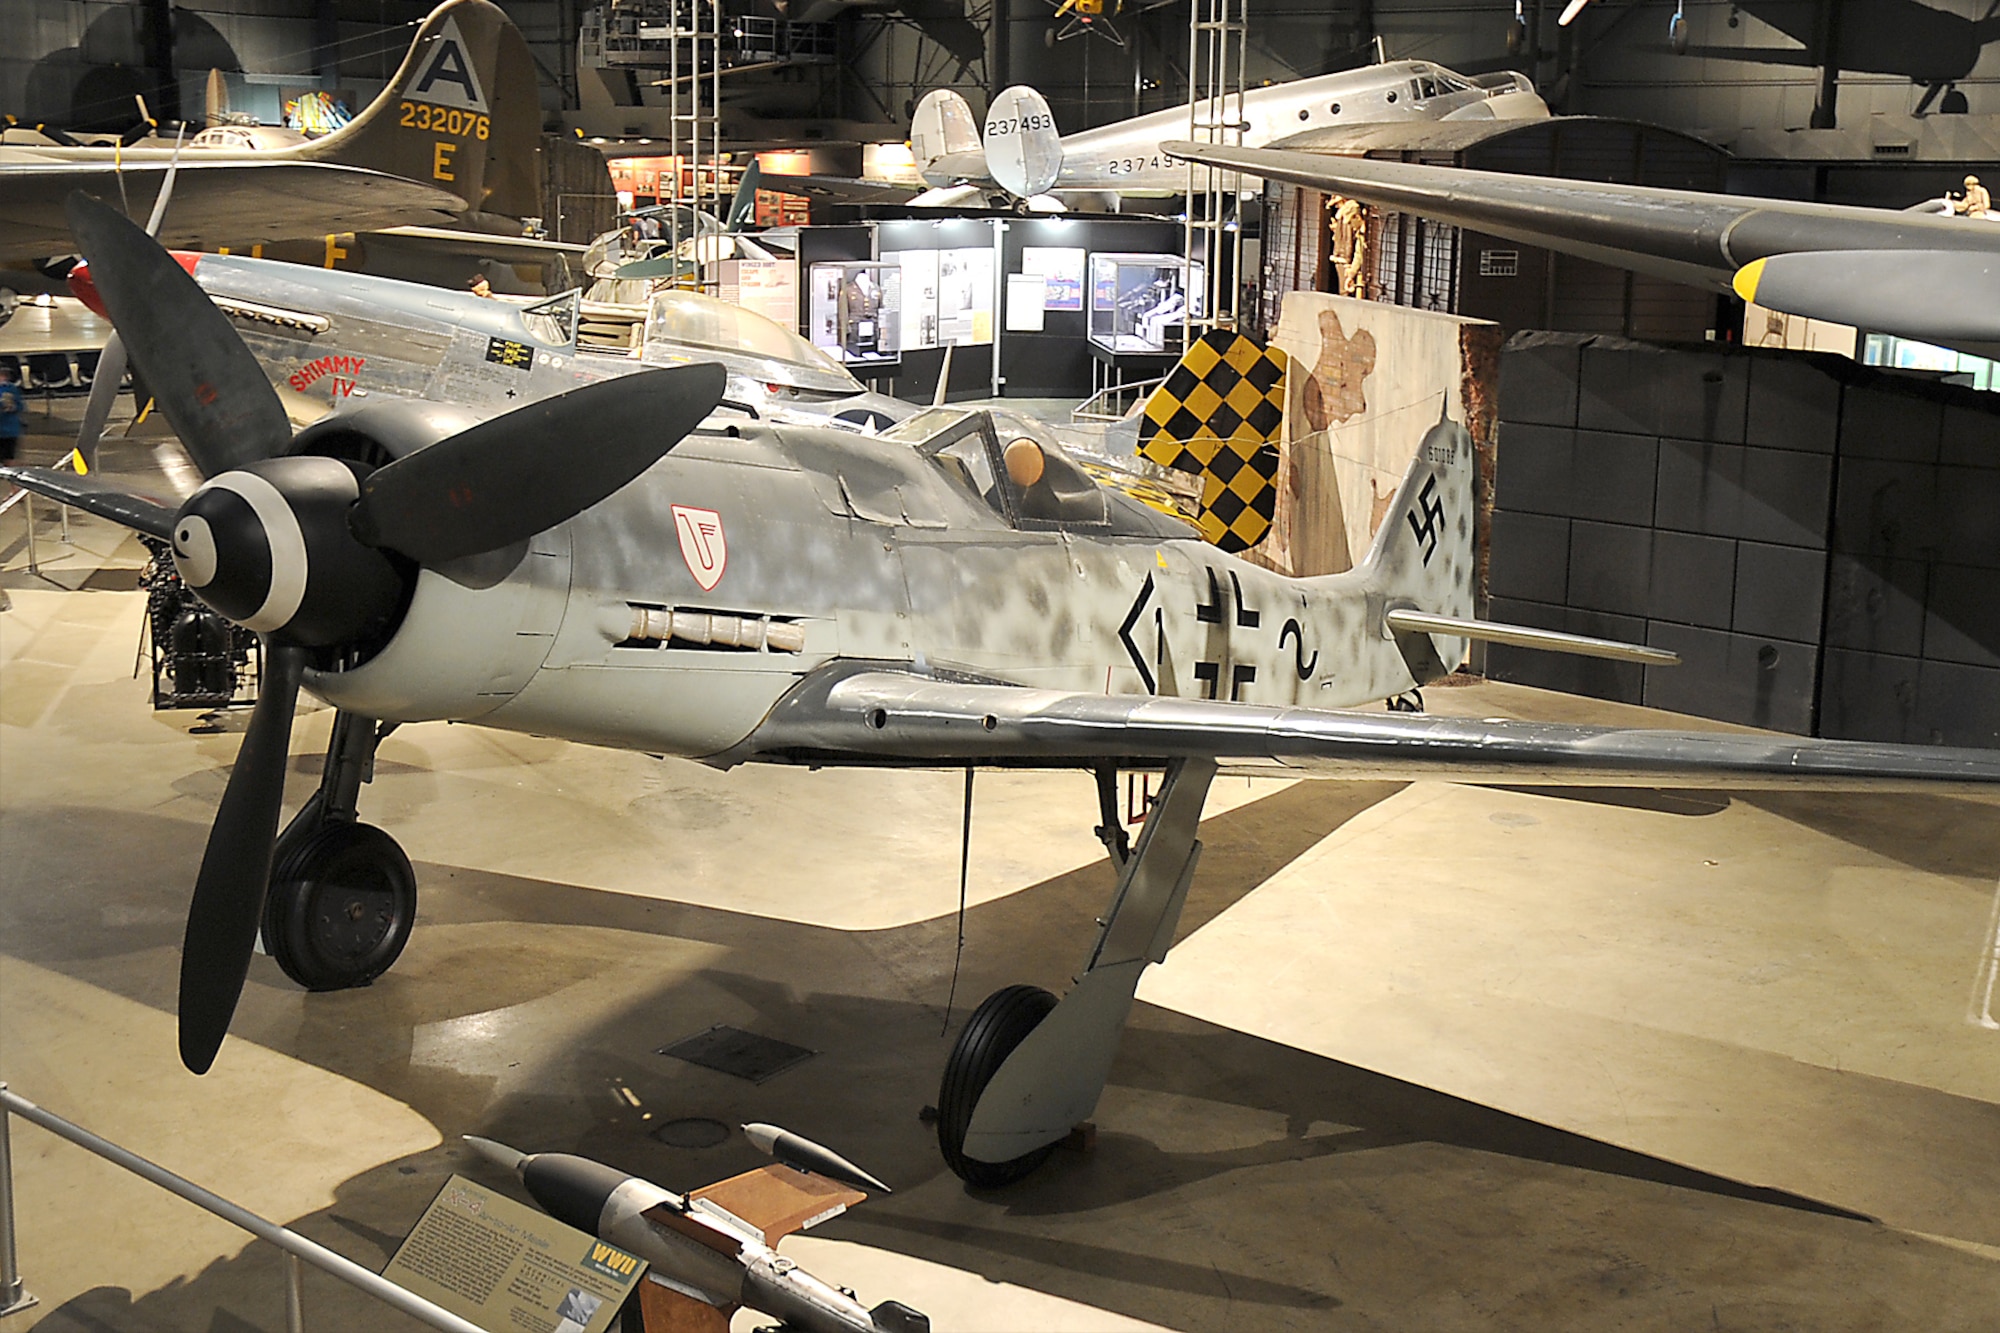 DAYTON, Ohio -- Focke-Wulf Fw 190D-9 in the World War II Gallery at the National Museum of the United States Air Force. (U.S. Air Force photo)
